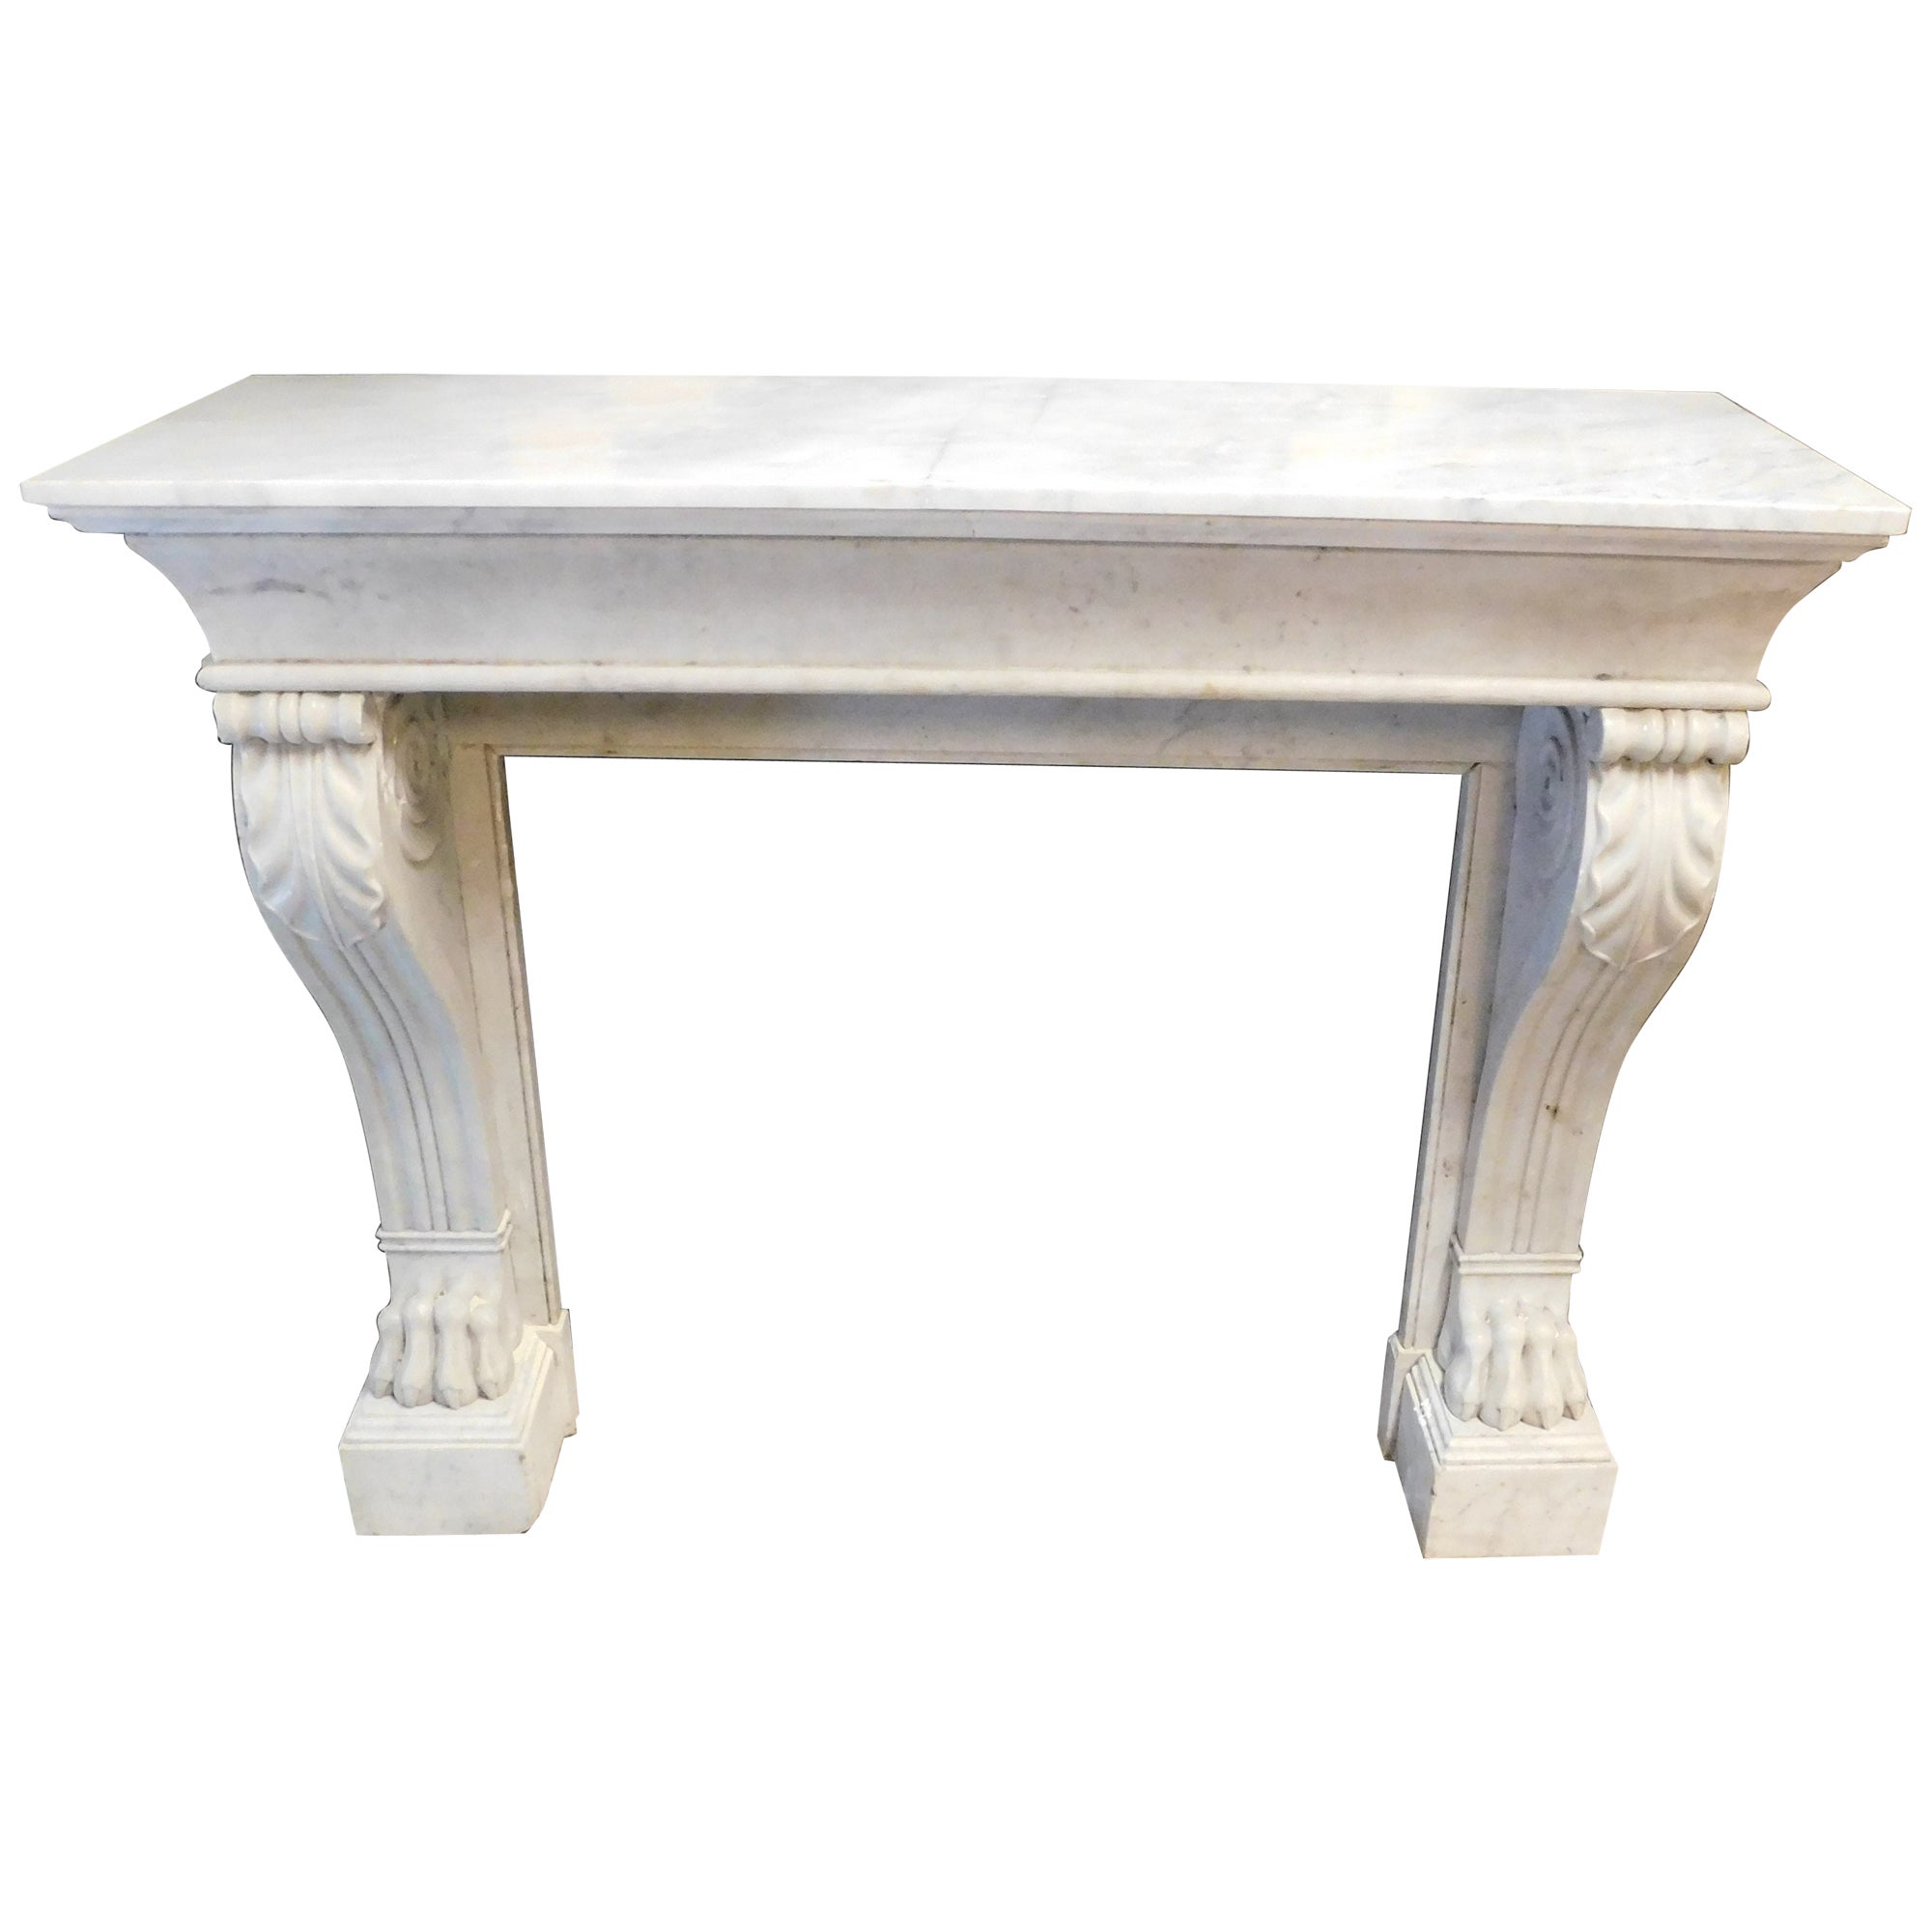 Fireplace mantel in white Carrara marble with lion's paws, Italy For Sale